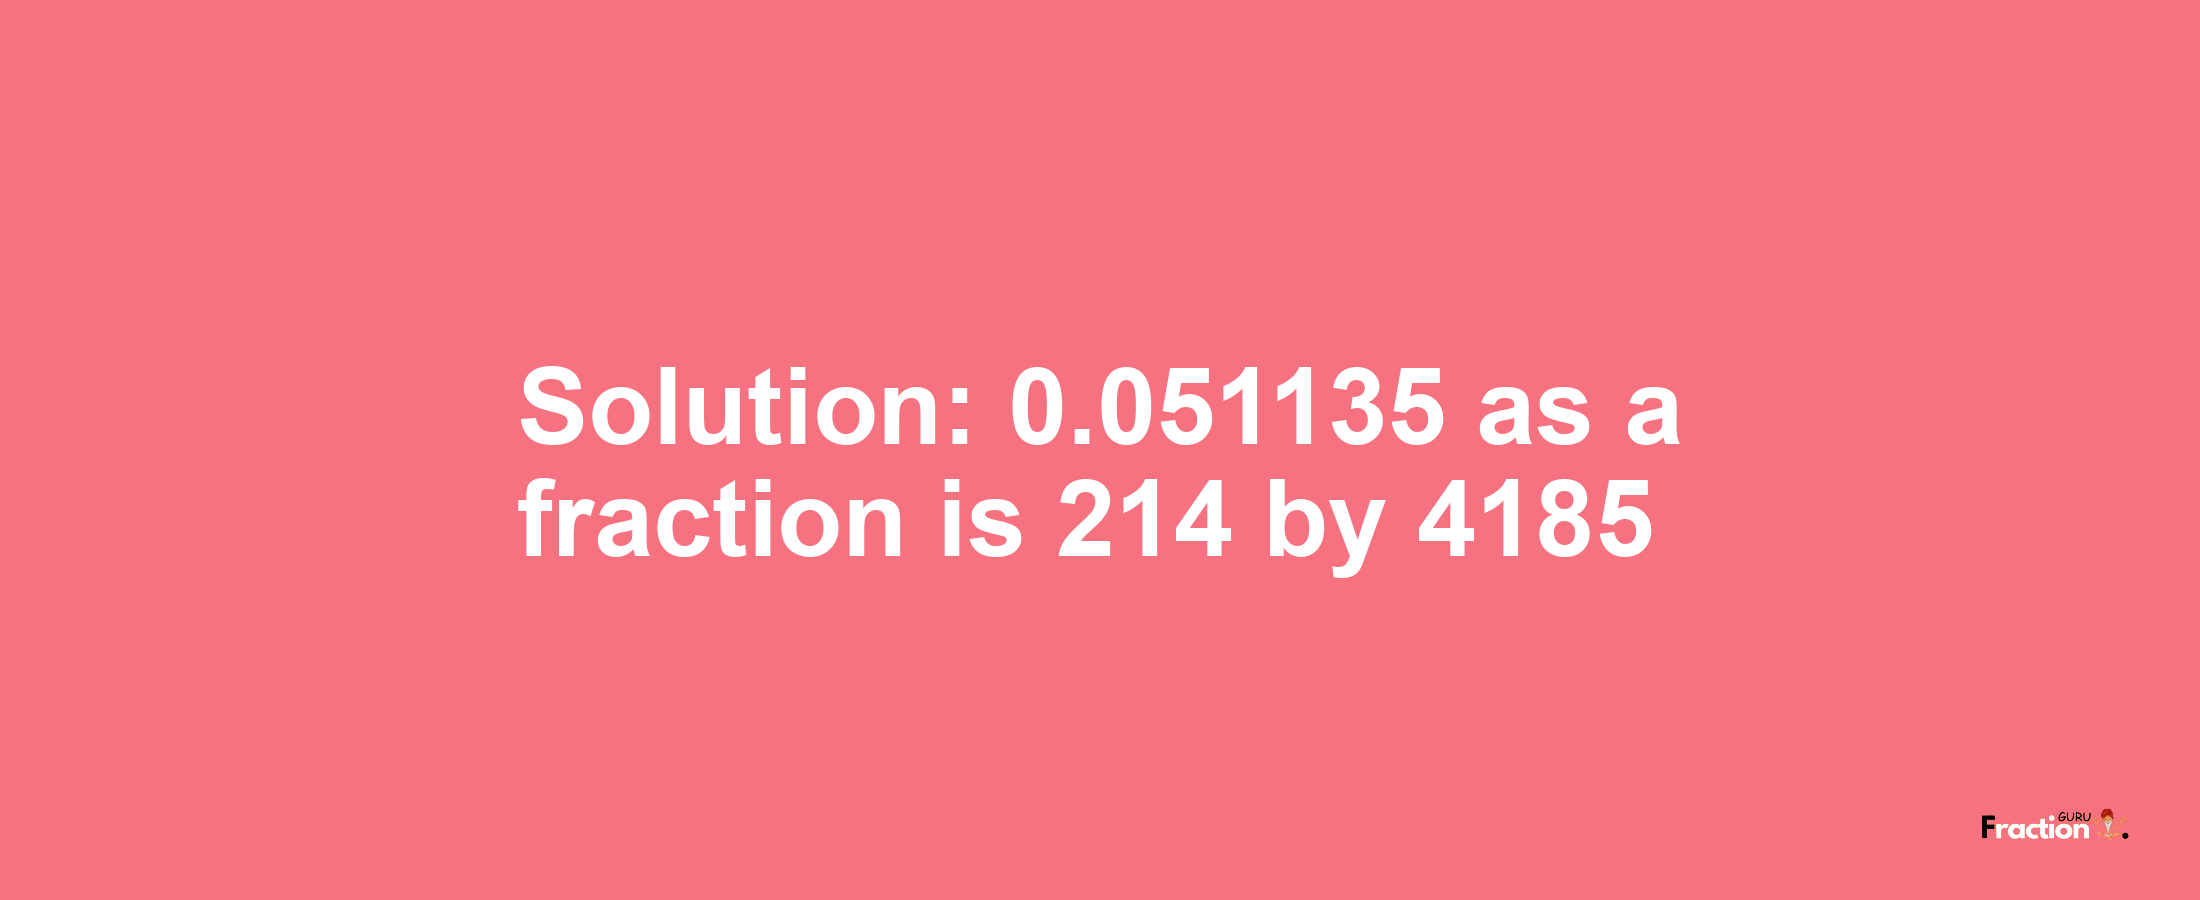 Solution:0.051135 as a fraction is 214/4185